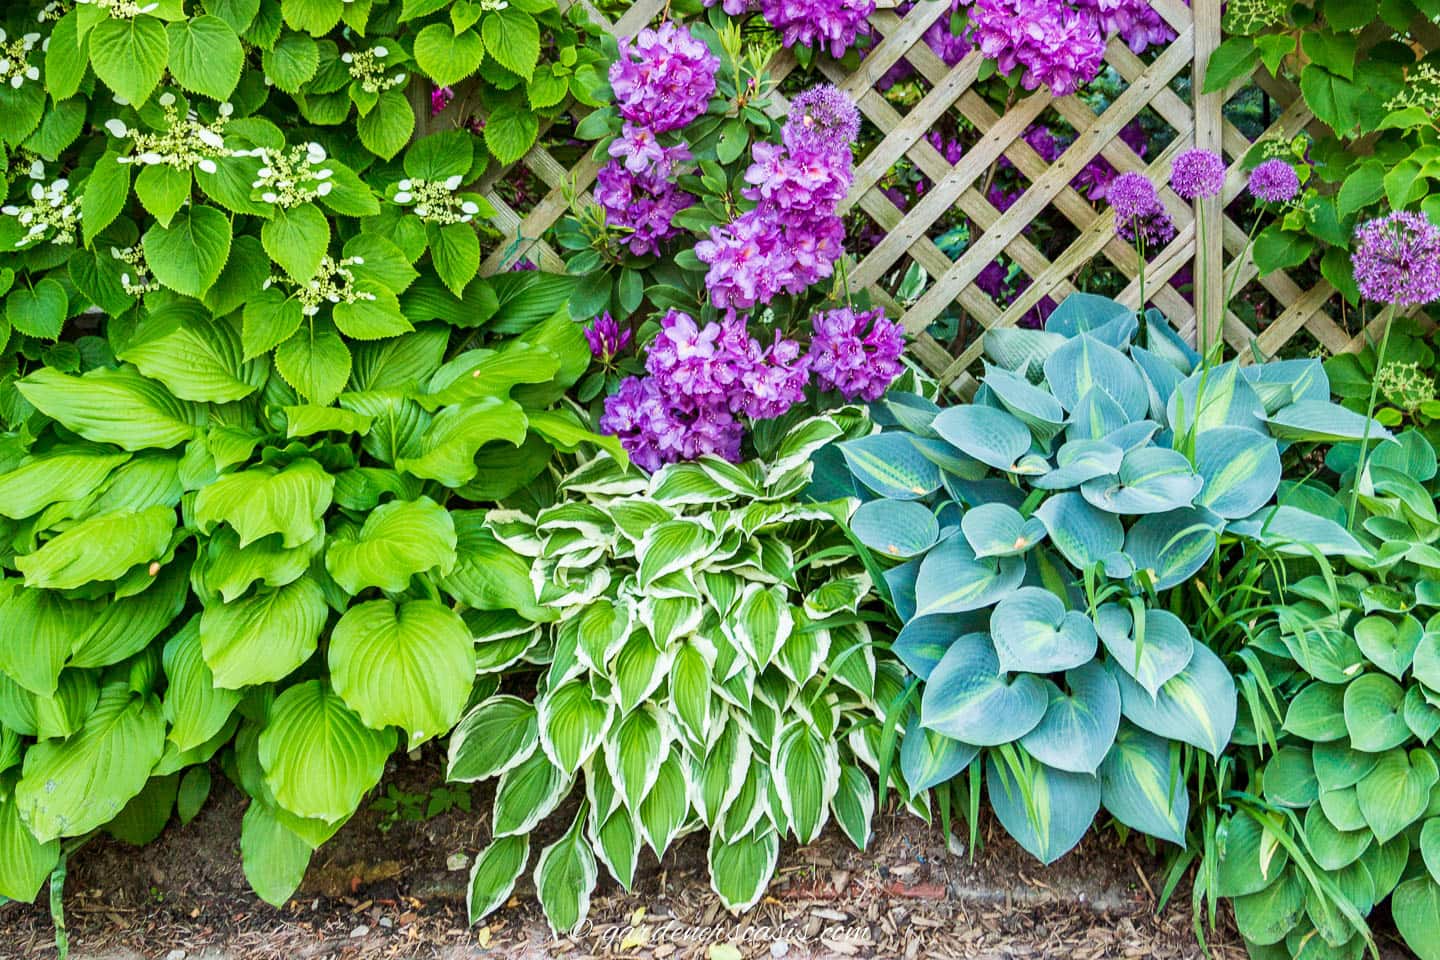 Hostas grouped together to create a lush ground cover